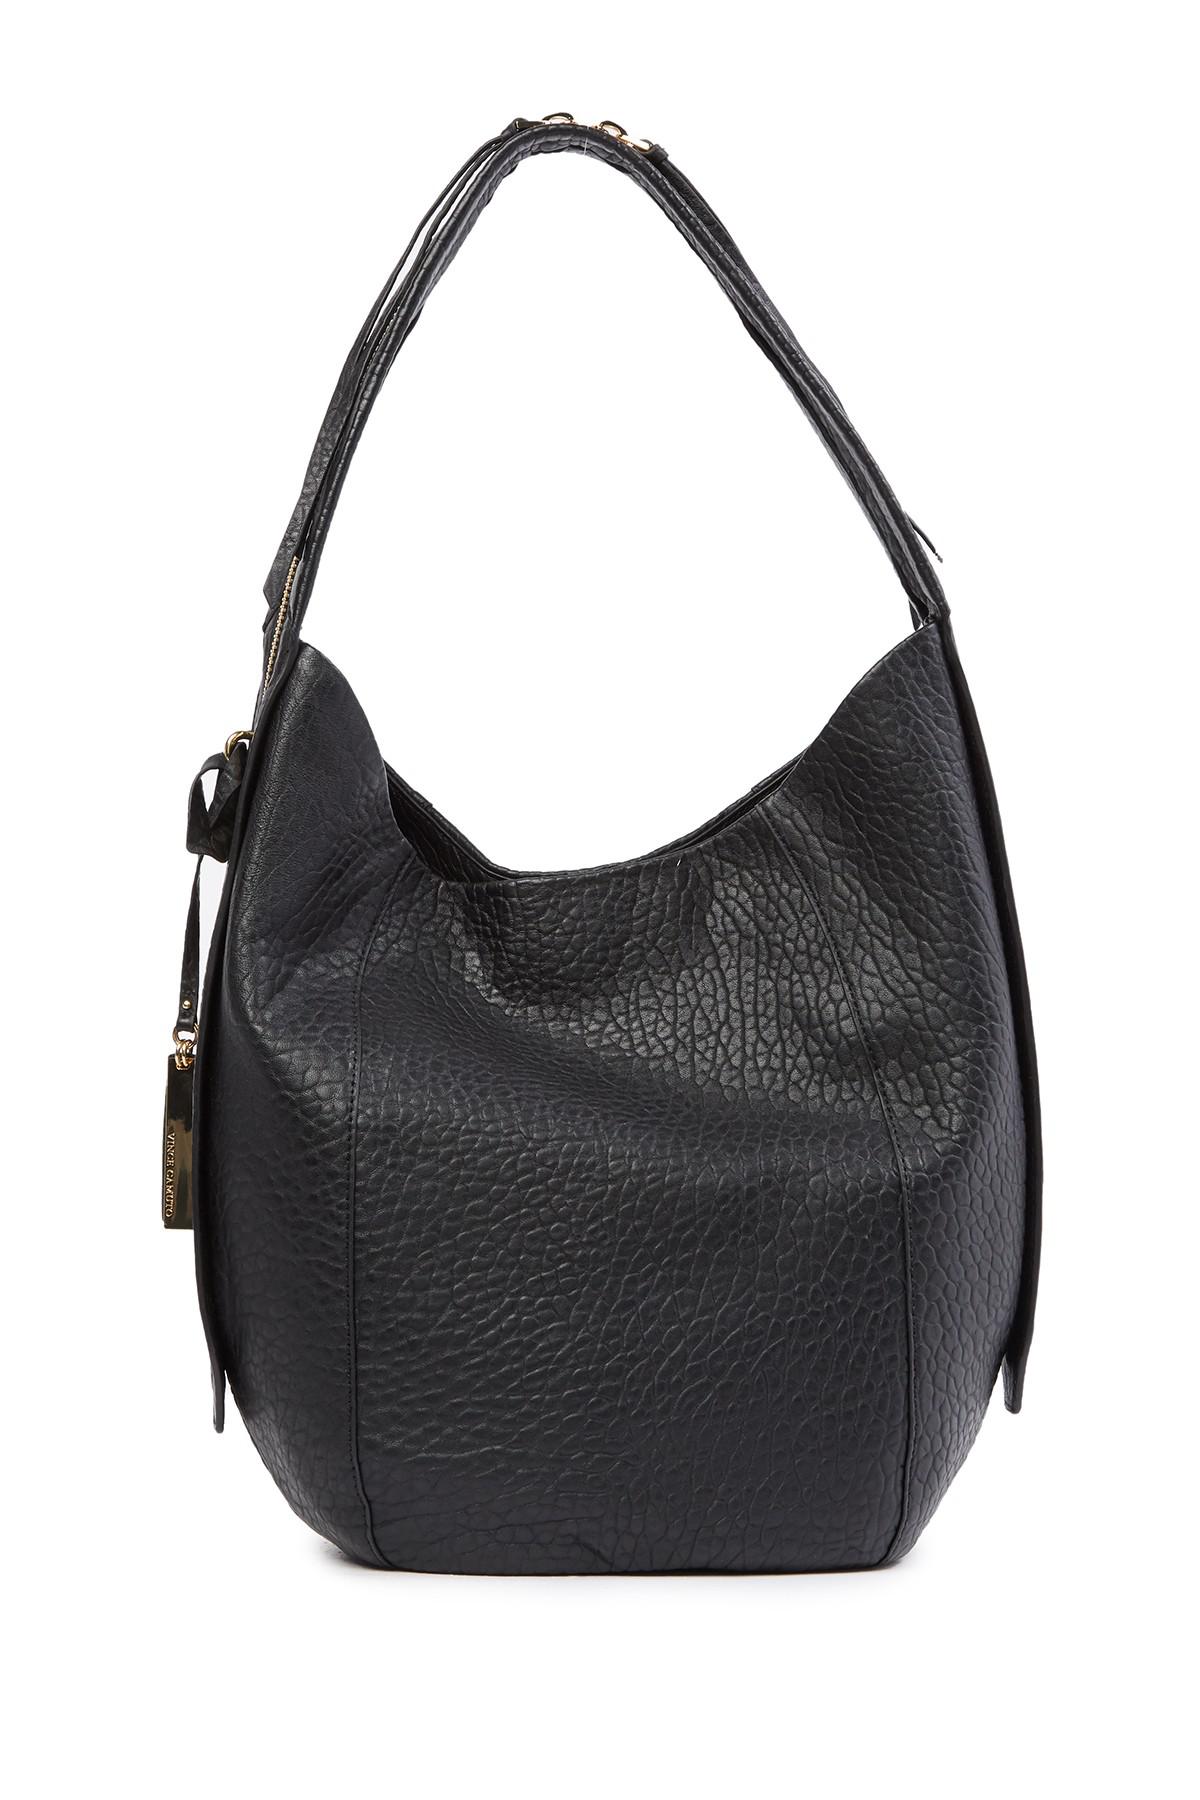 Vince Camuto Siny Leather Hobo Bag in Black - Lyst